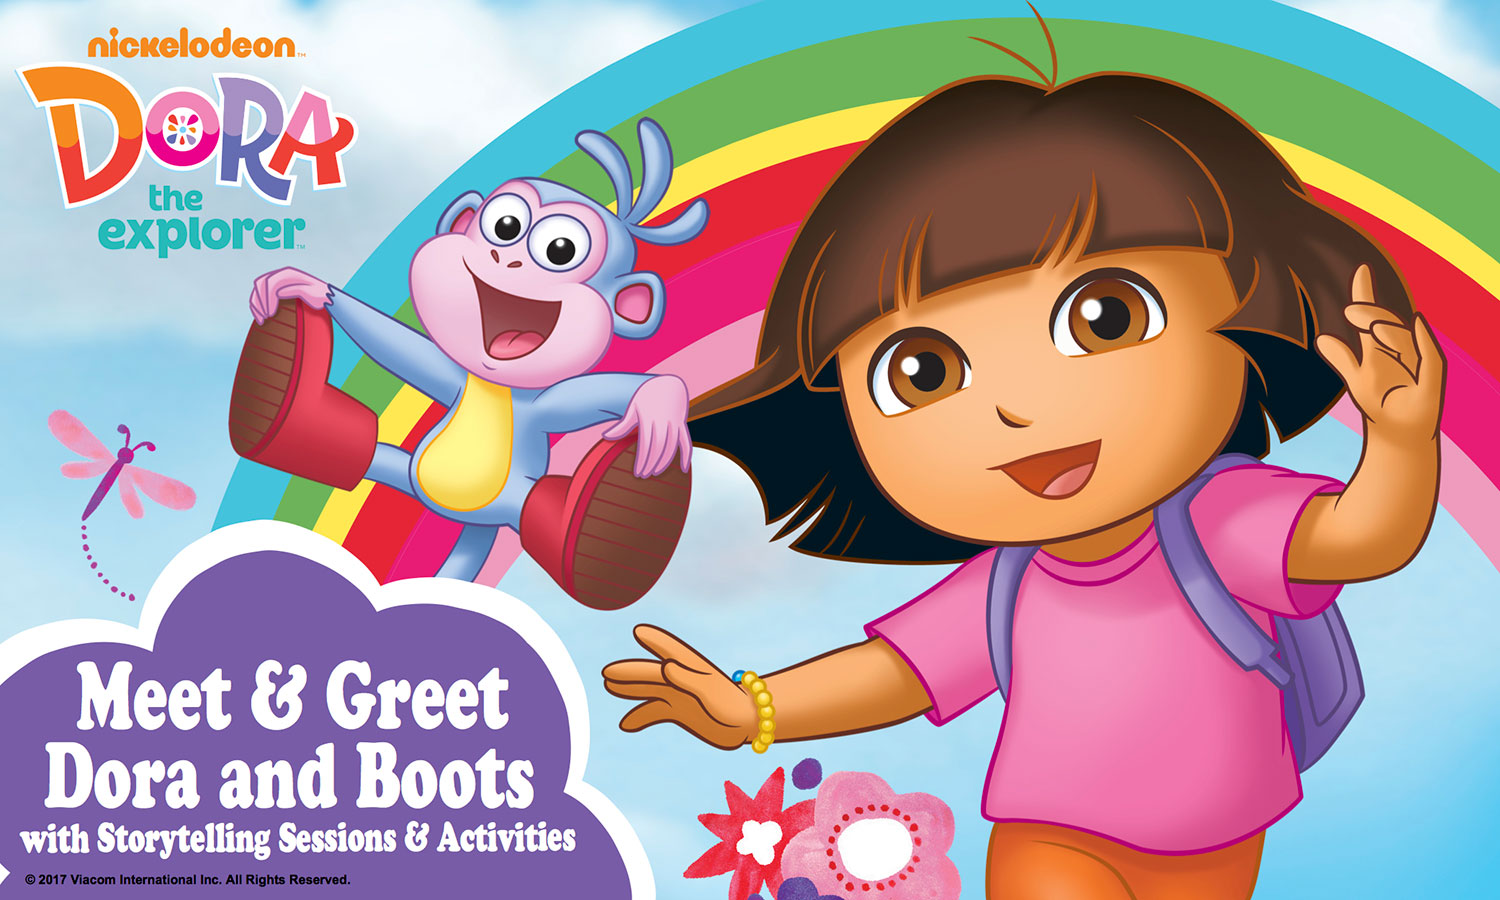 Dora’s “Are You Ready For Adventure?” Mall Show